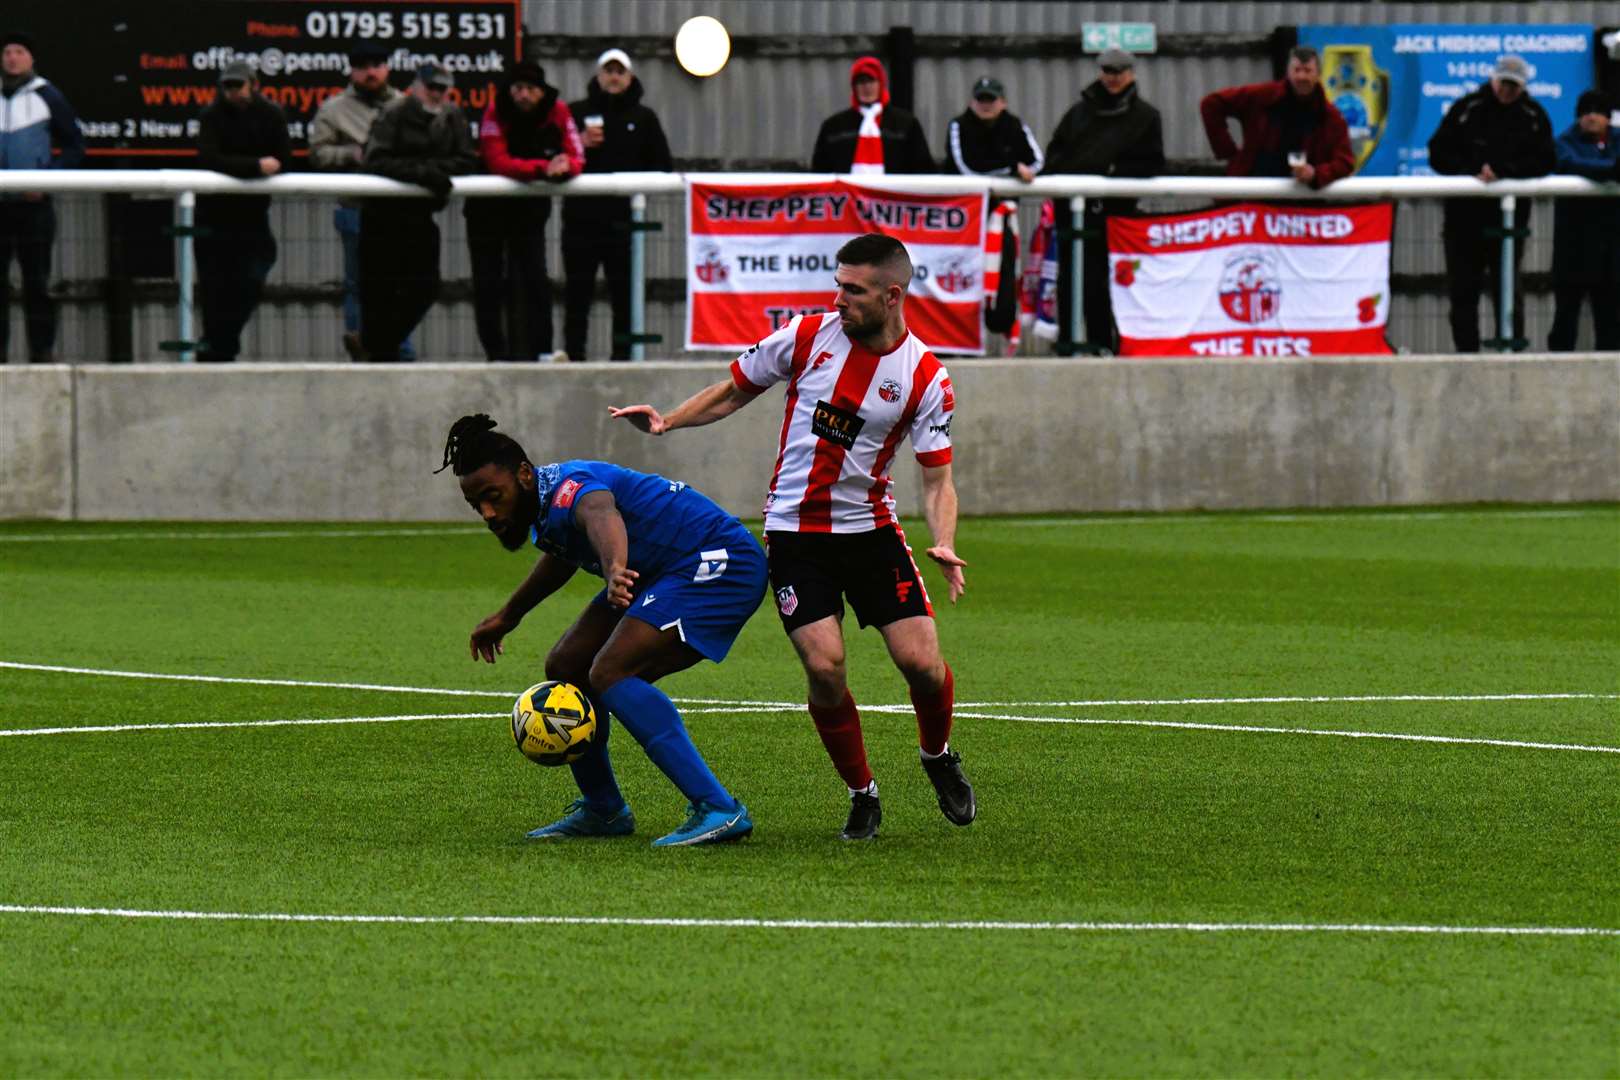 Danny Leonard was a Sheppey goalscorer on Saturday Picture: Marc Richards